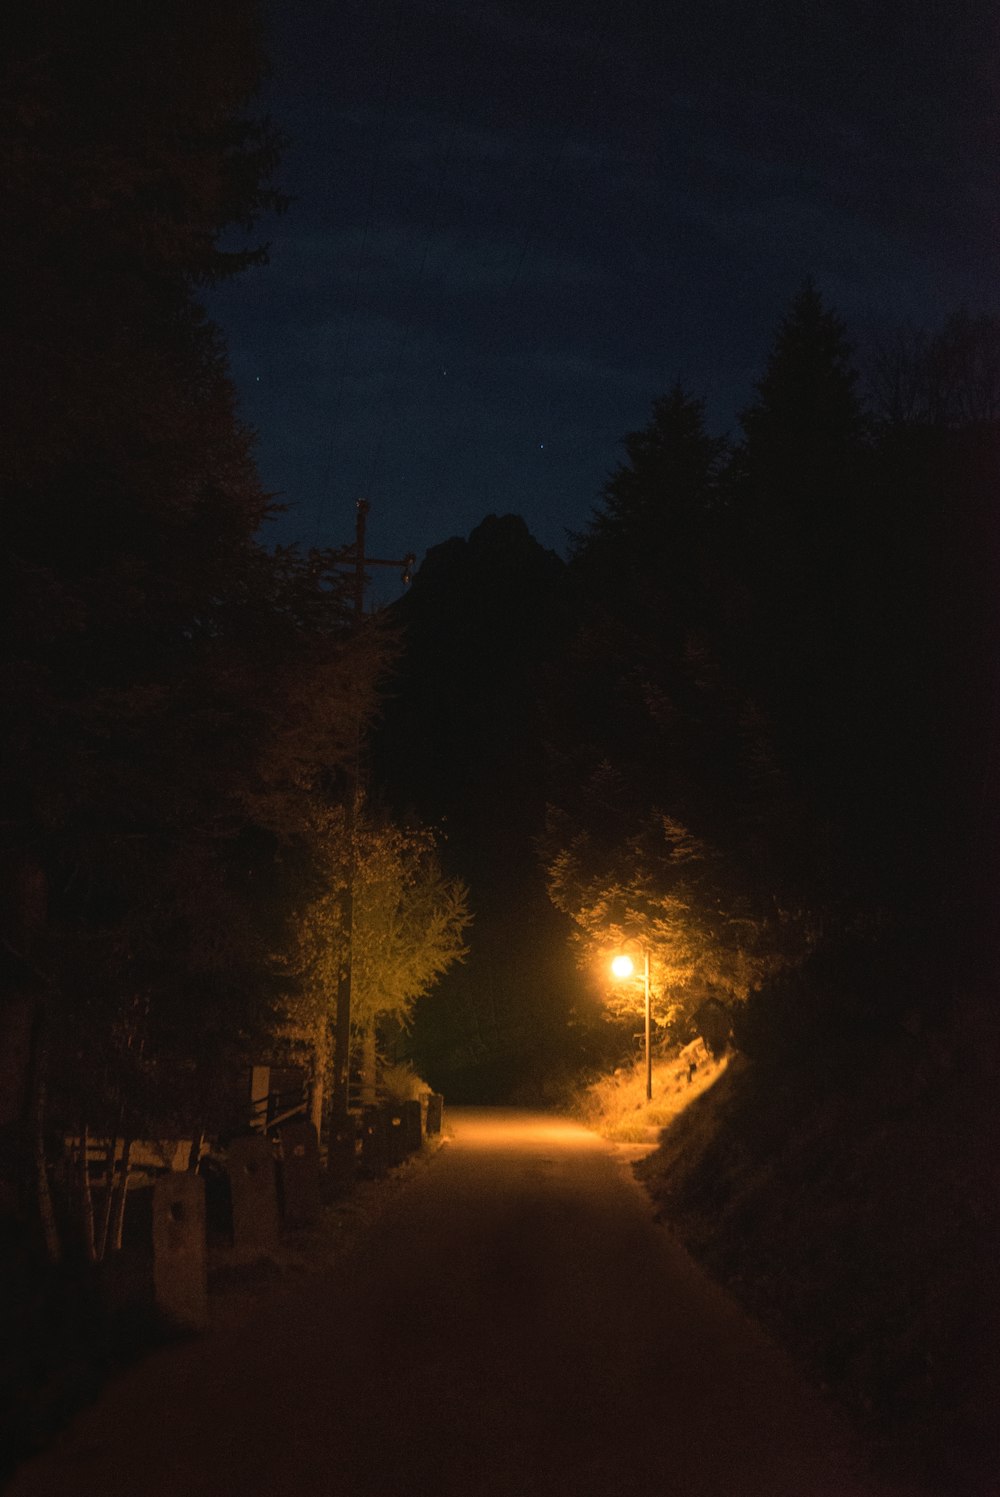 lighted street lamp near trees during night time